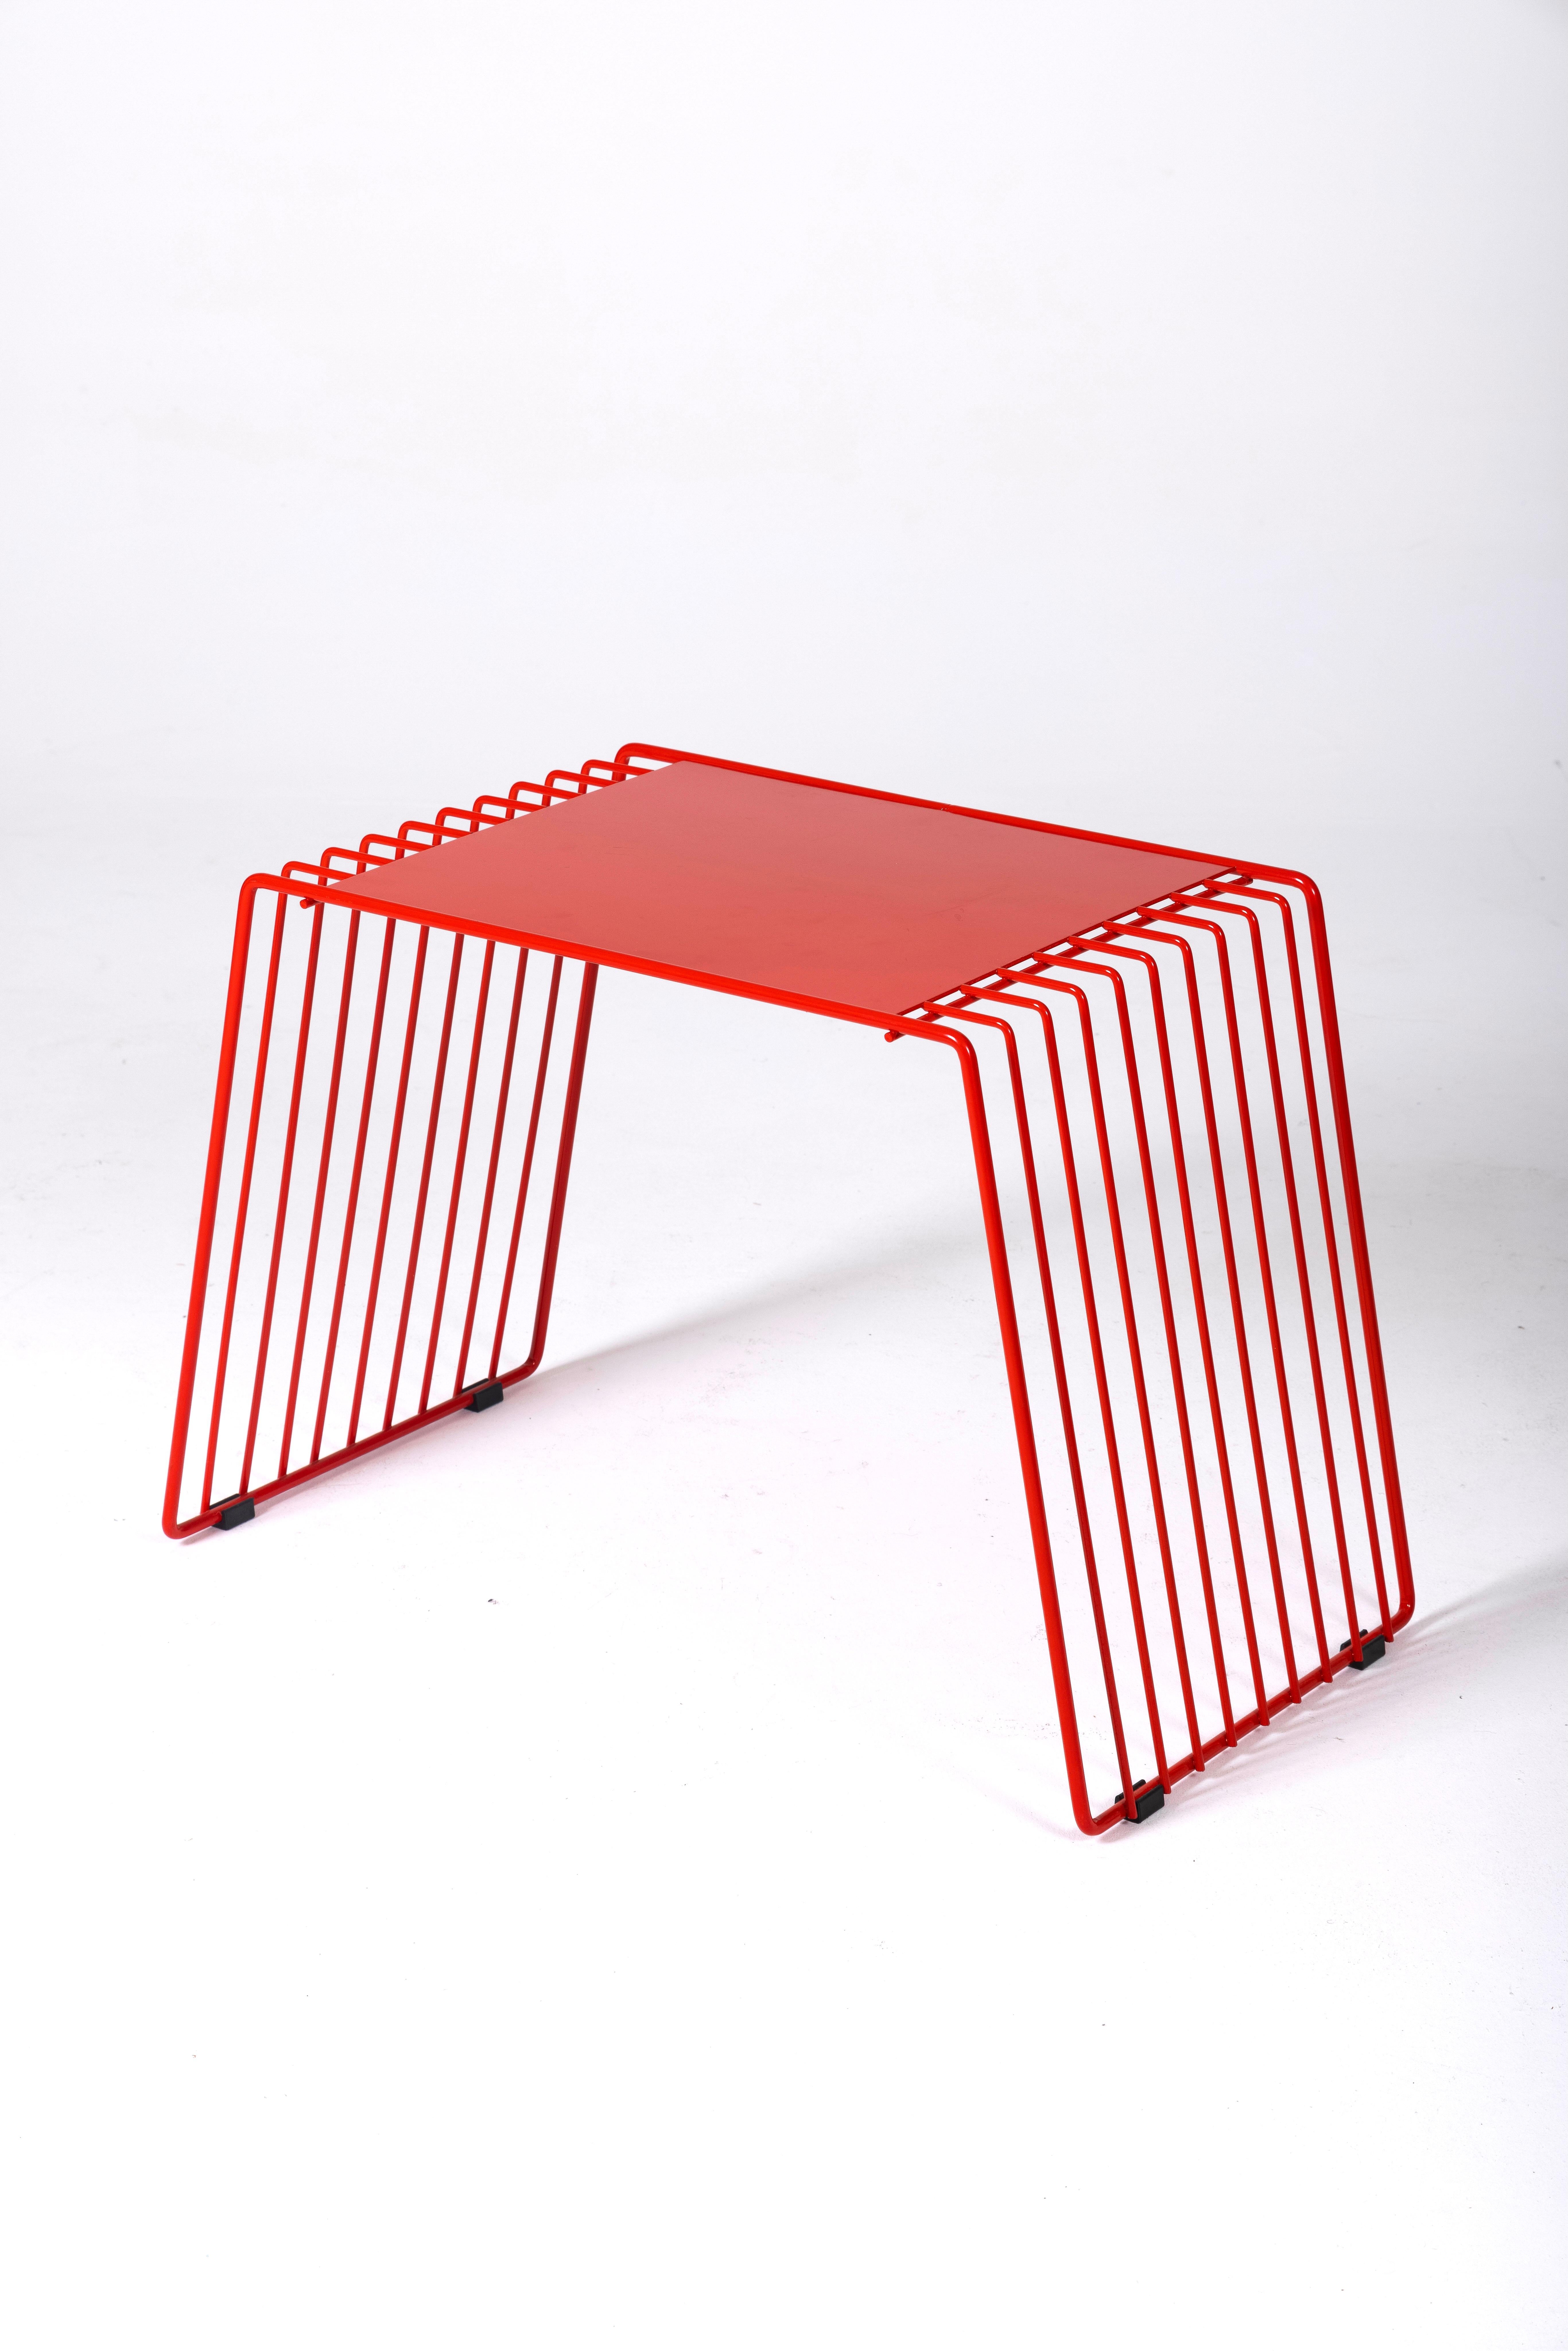 Desk for children by designer François Arnal for Atelier A, contemporary edition. The tubular frame is in red lacquered metal. This stool pairs perfectly with furniture by designers like Bruno Munari, Ettore Sottsass, or Gerrit Thomas Rietveld.
DV187